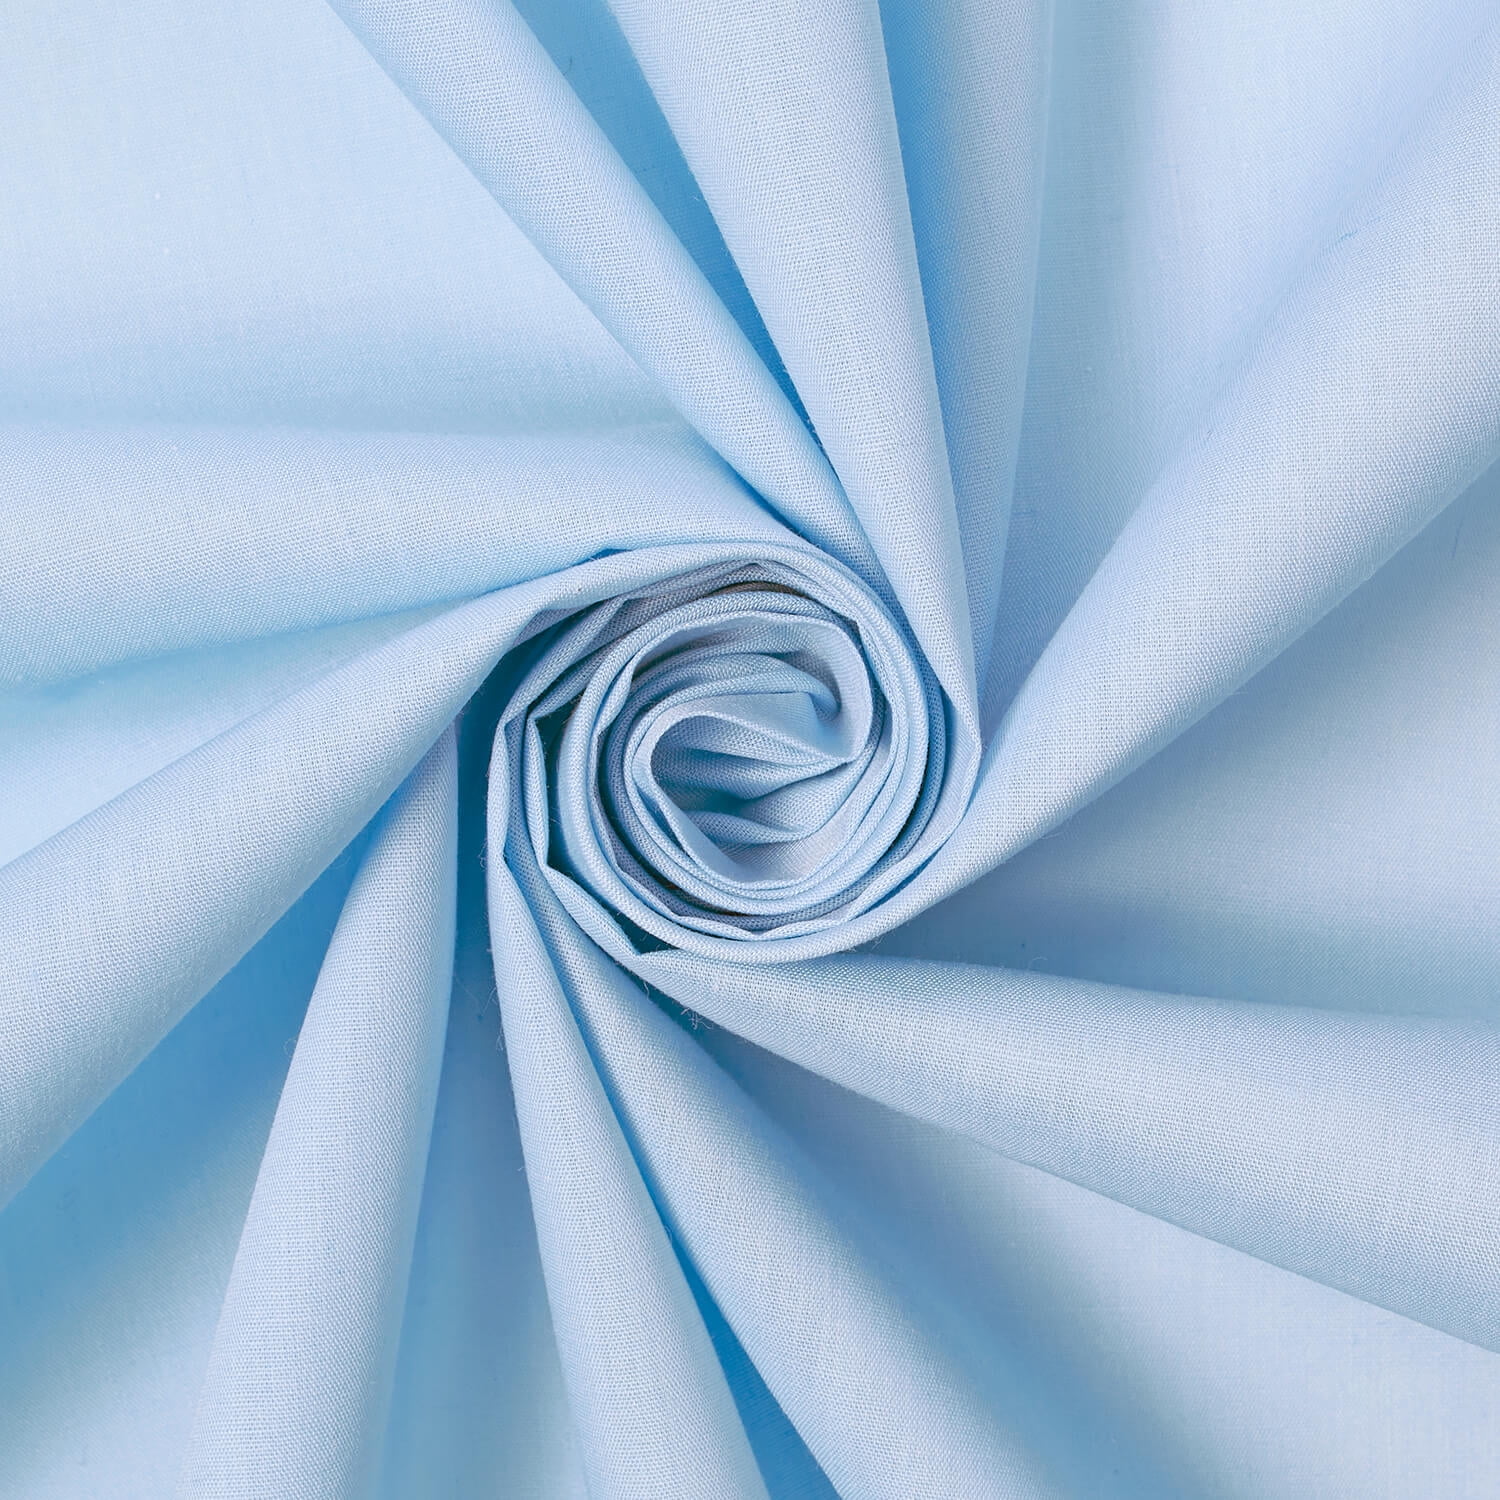 Cotton Polyester Broadcloth Fabric Premium Apparel Quilting 60 Wide Sold  By the Yard Wholesale (Turquoise) 